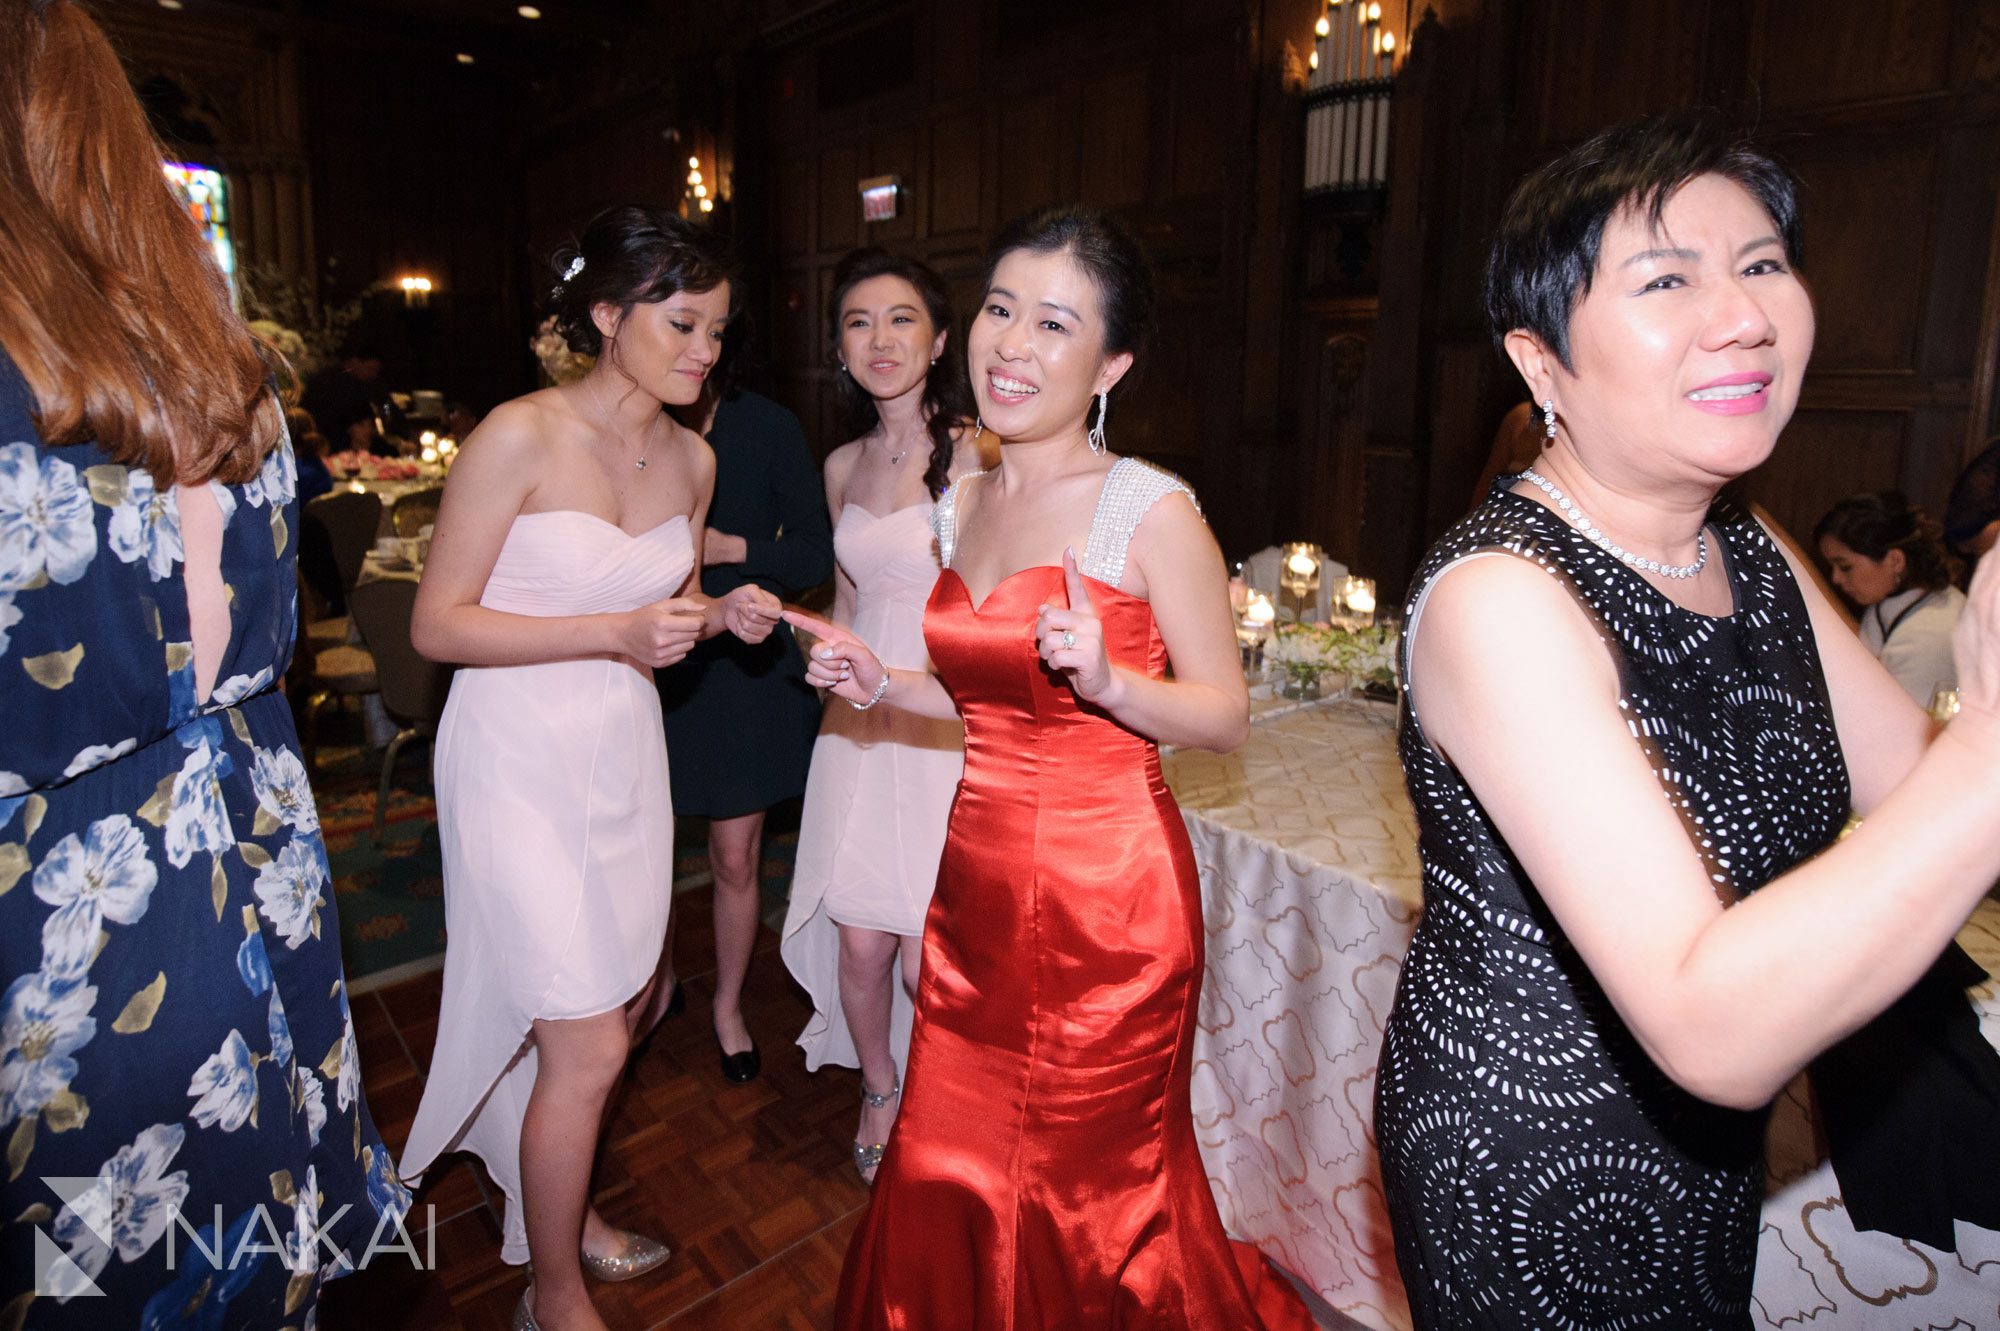 Intercontinental-Magnificent-Mile-wedding-reception-pictures-nakai-photography-58